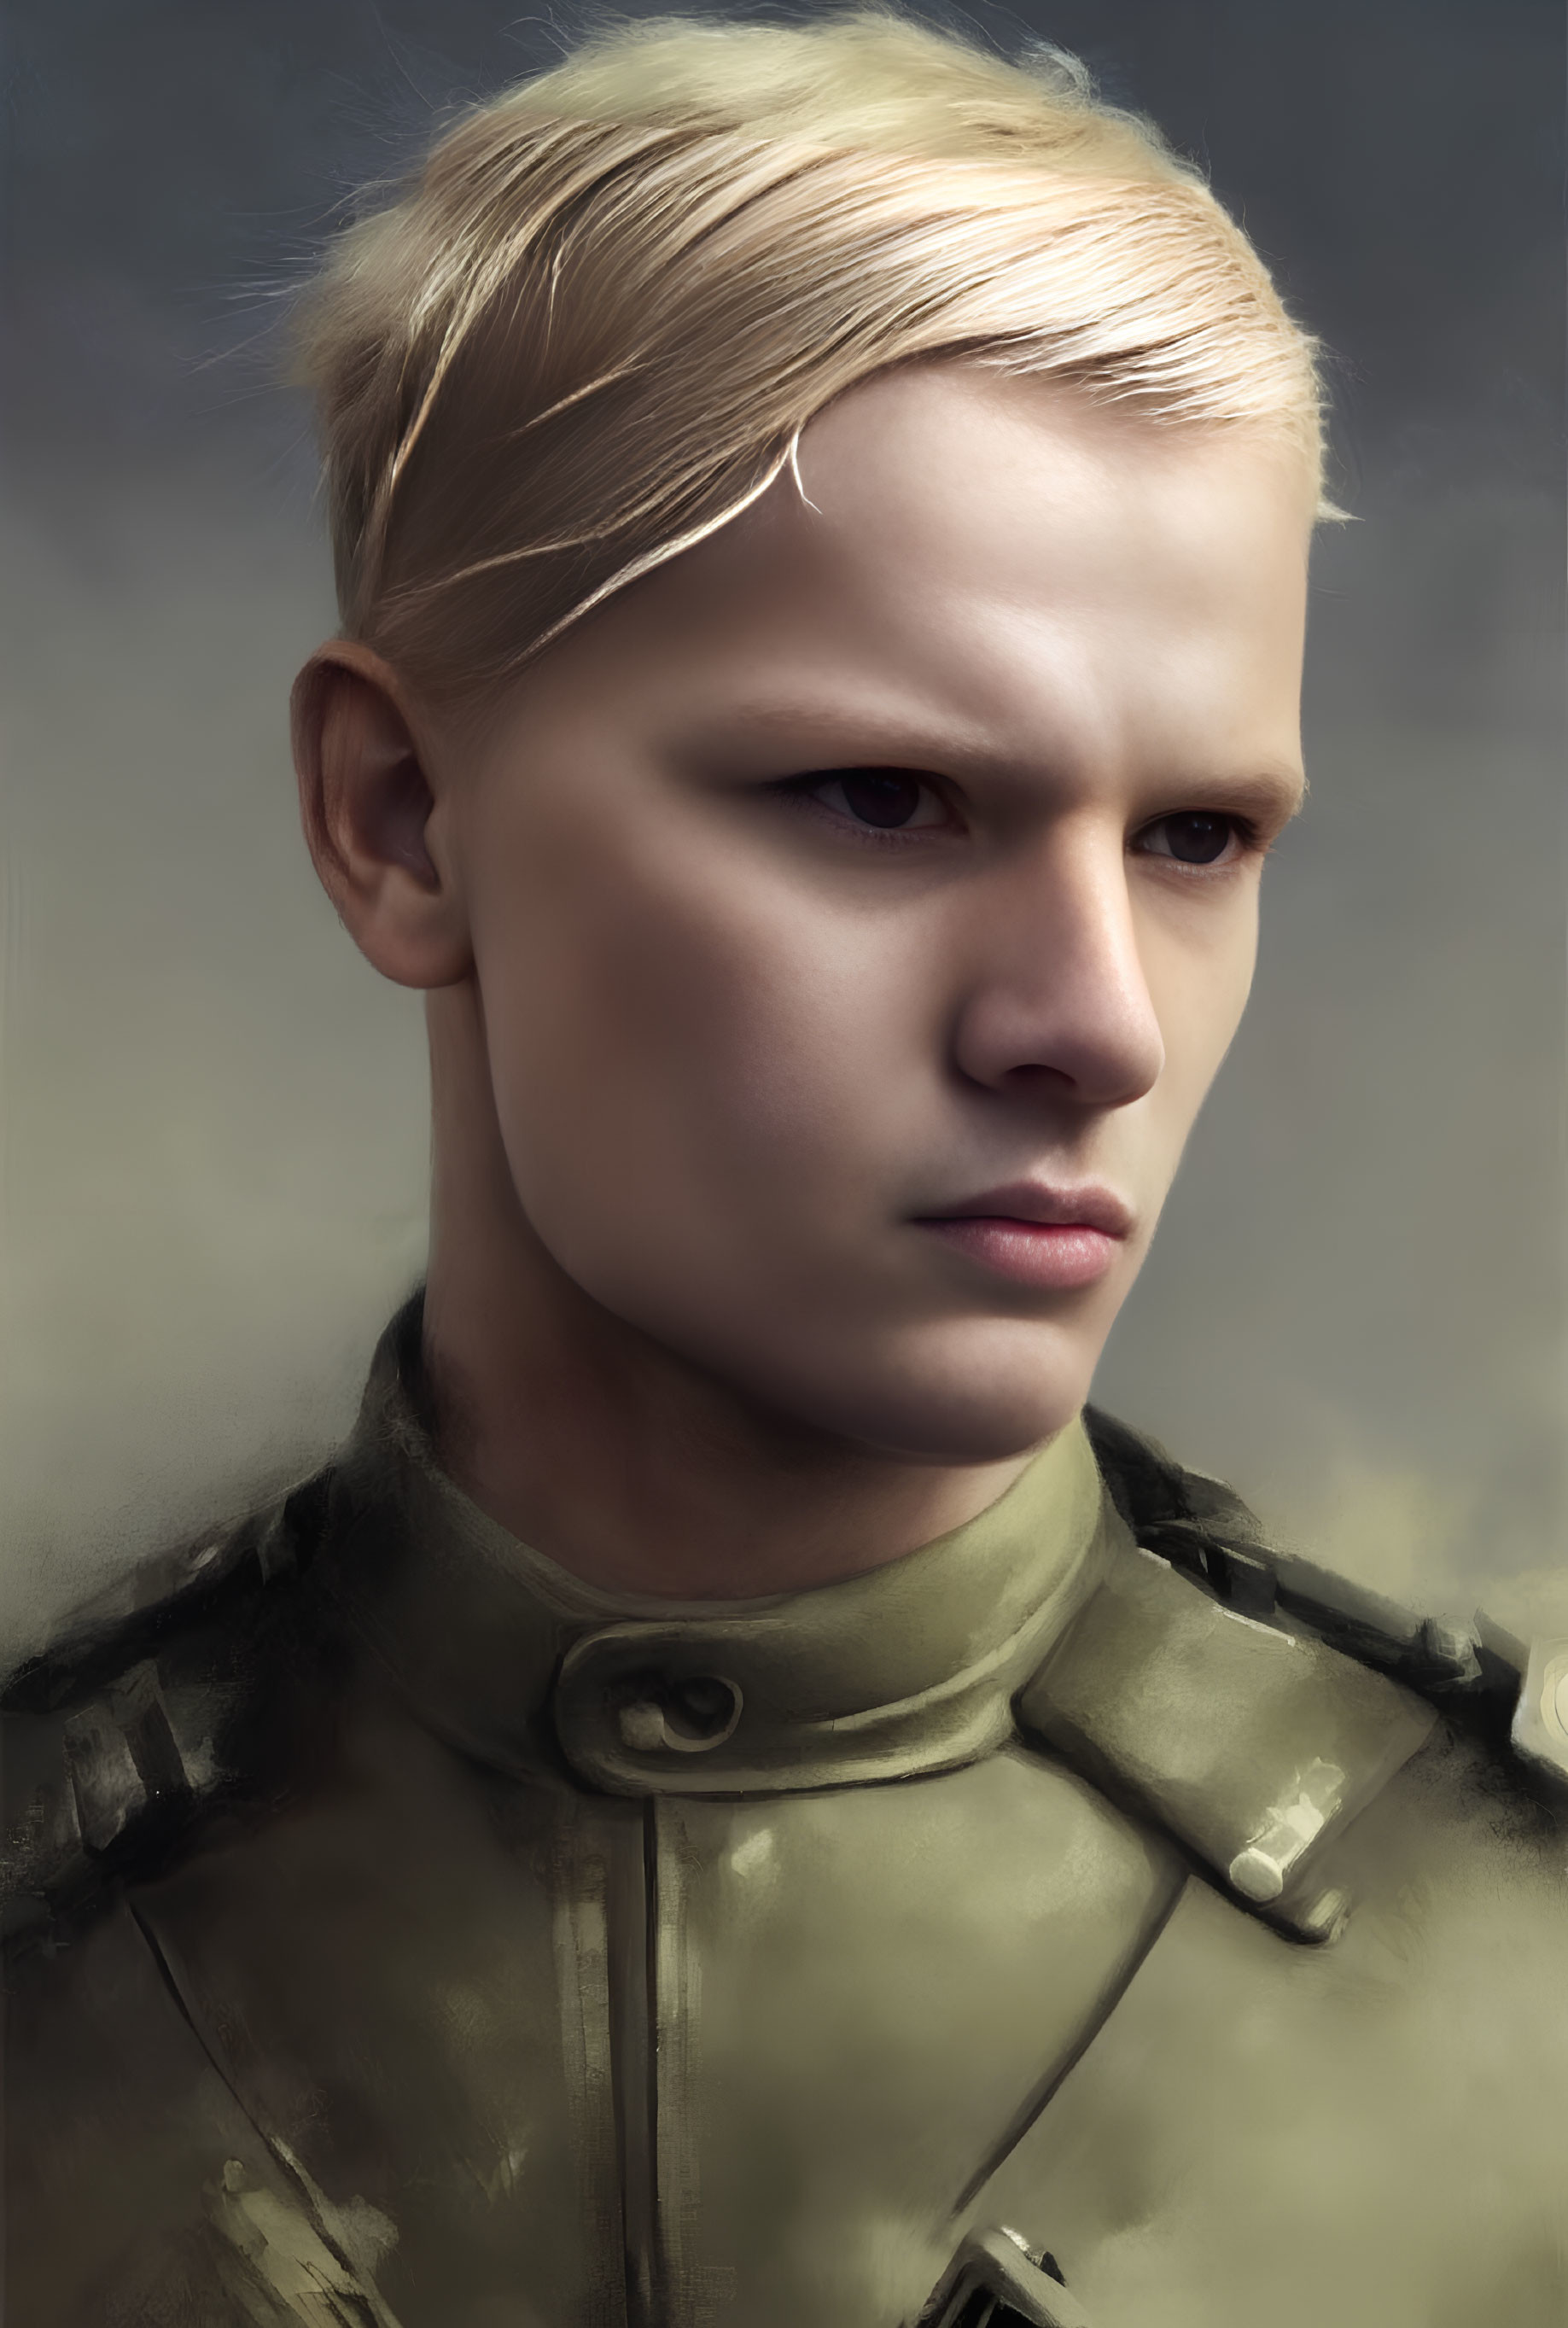 Blond Male Portrait in Military-Style Uniform